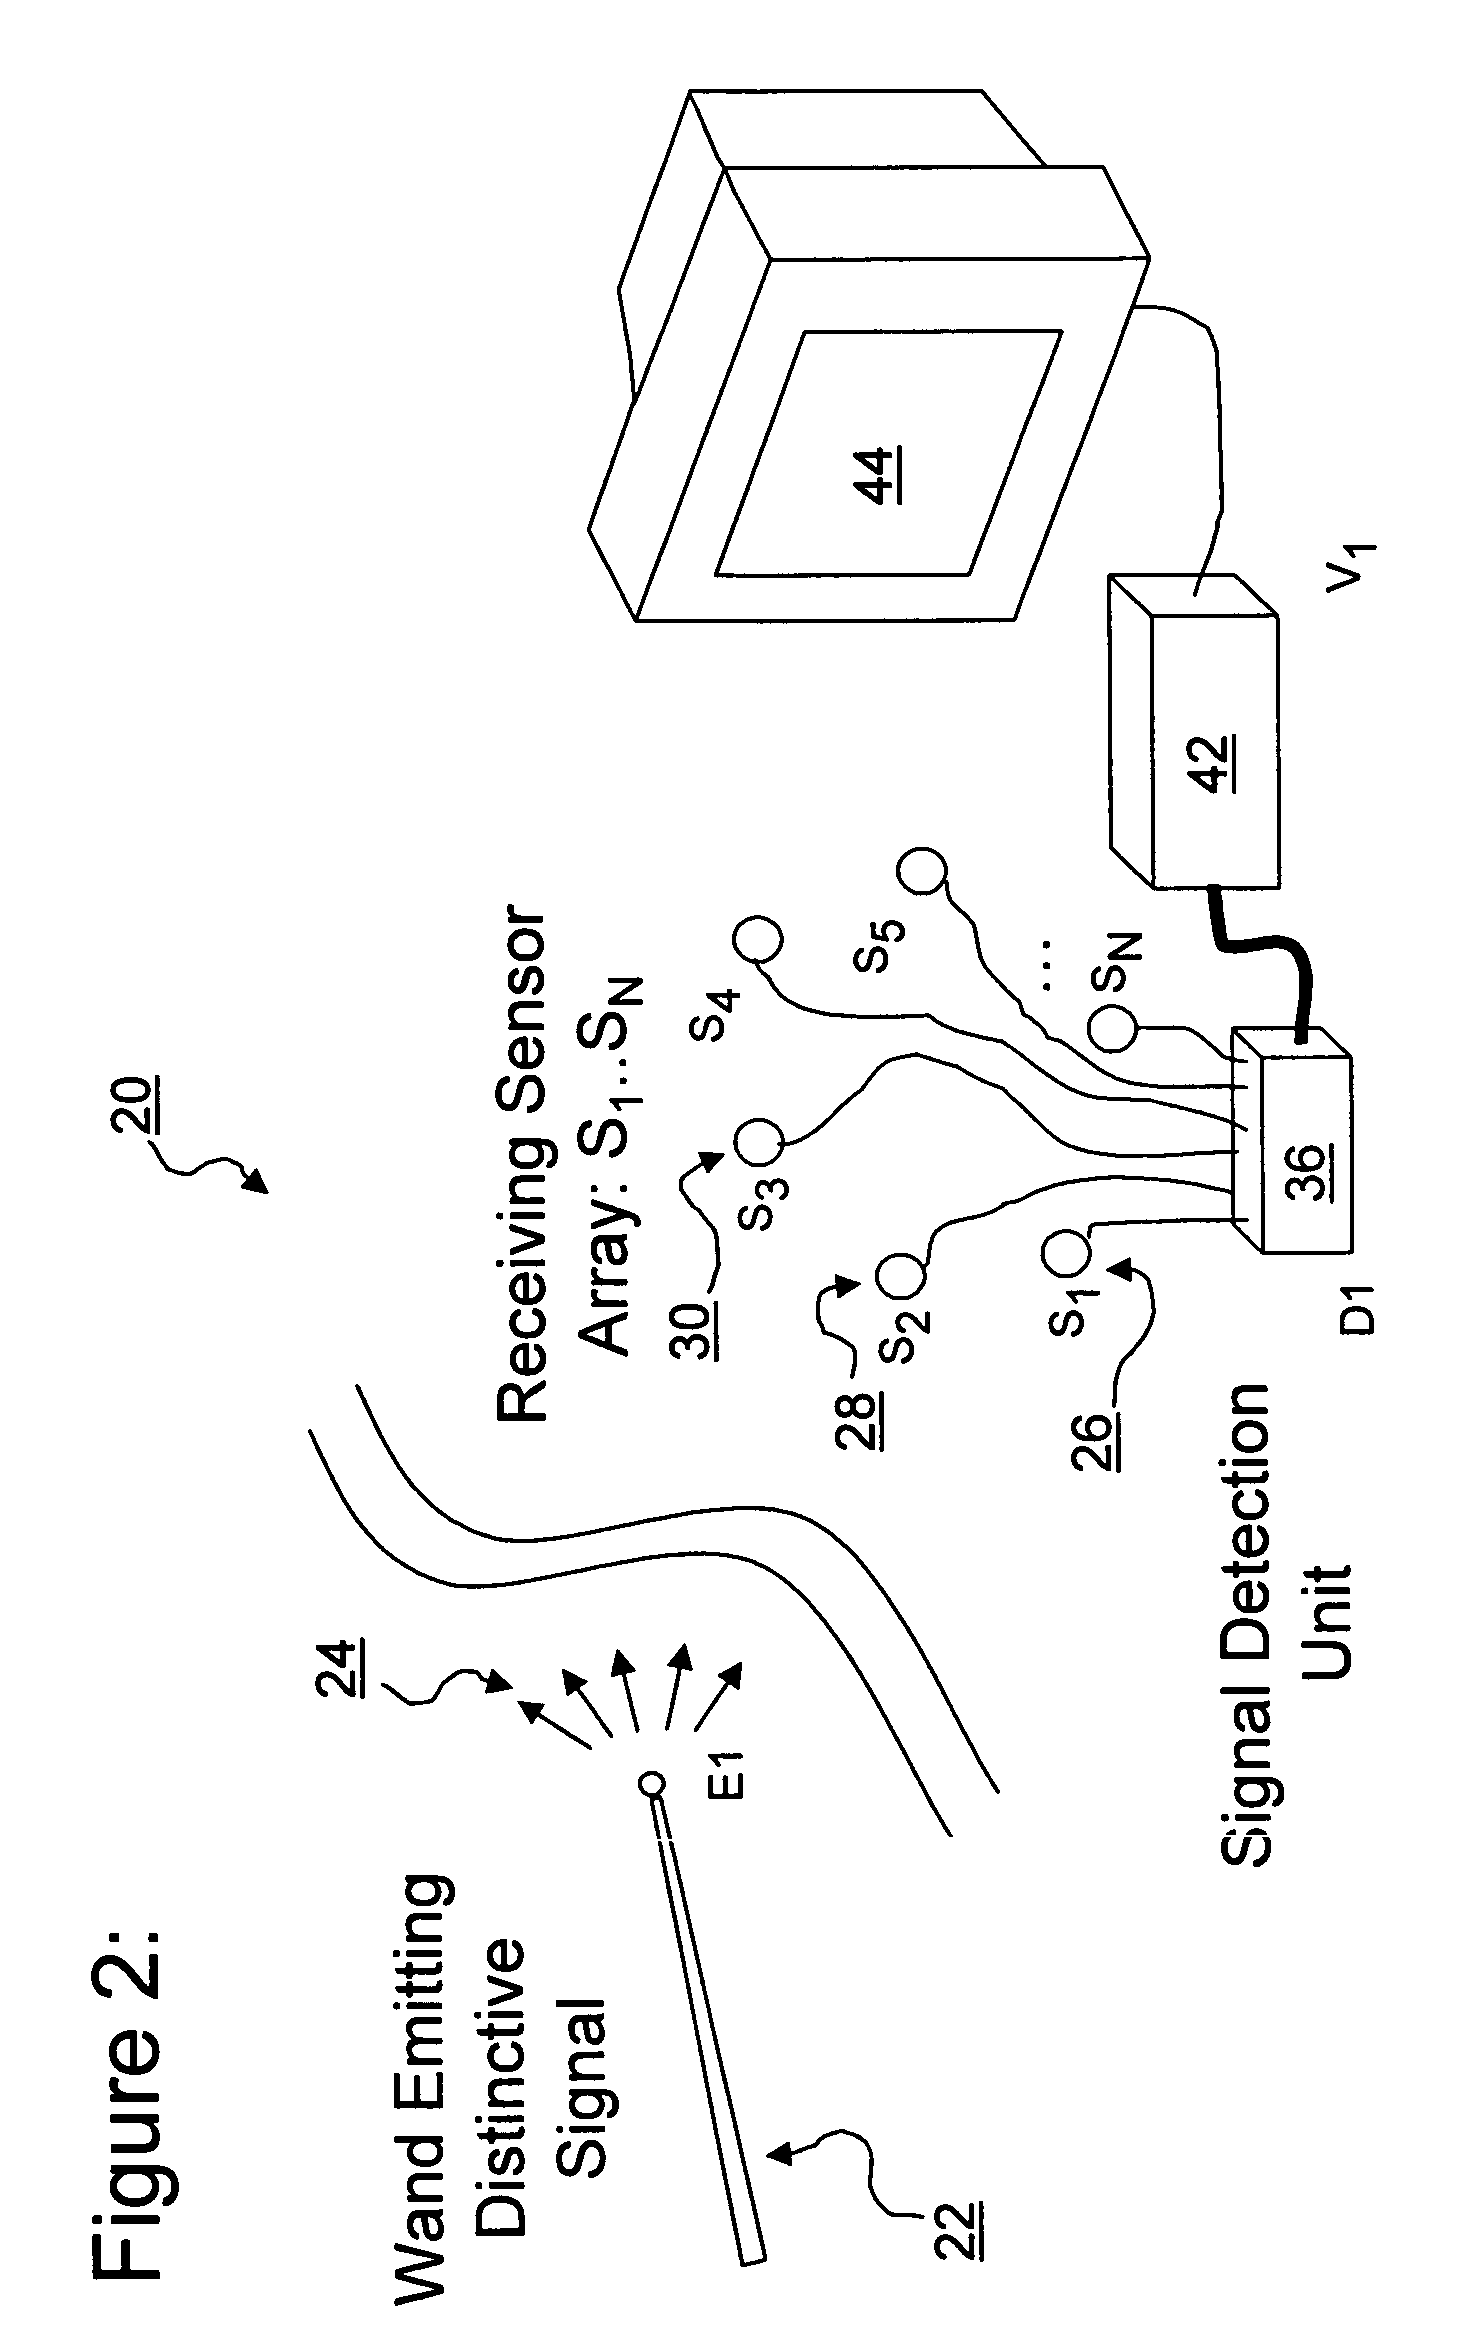 Three-dimensional position and motion telemetry input